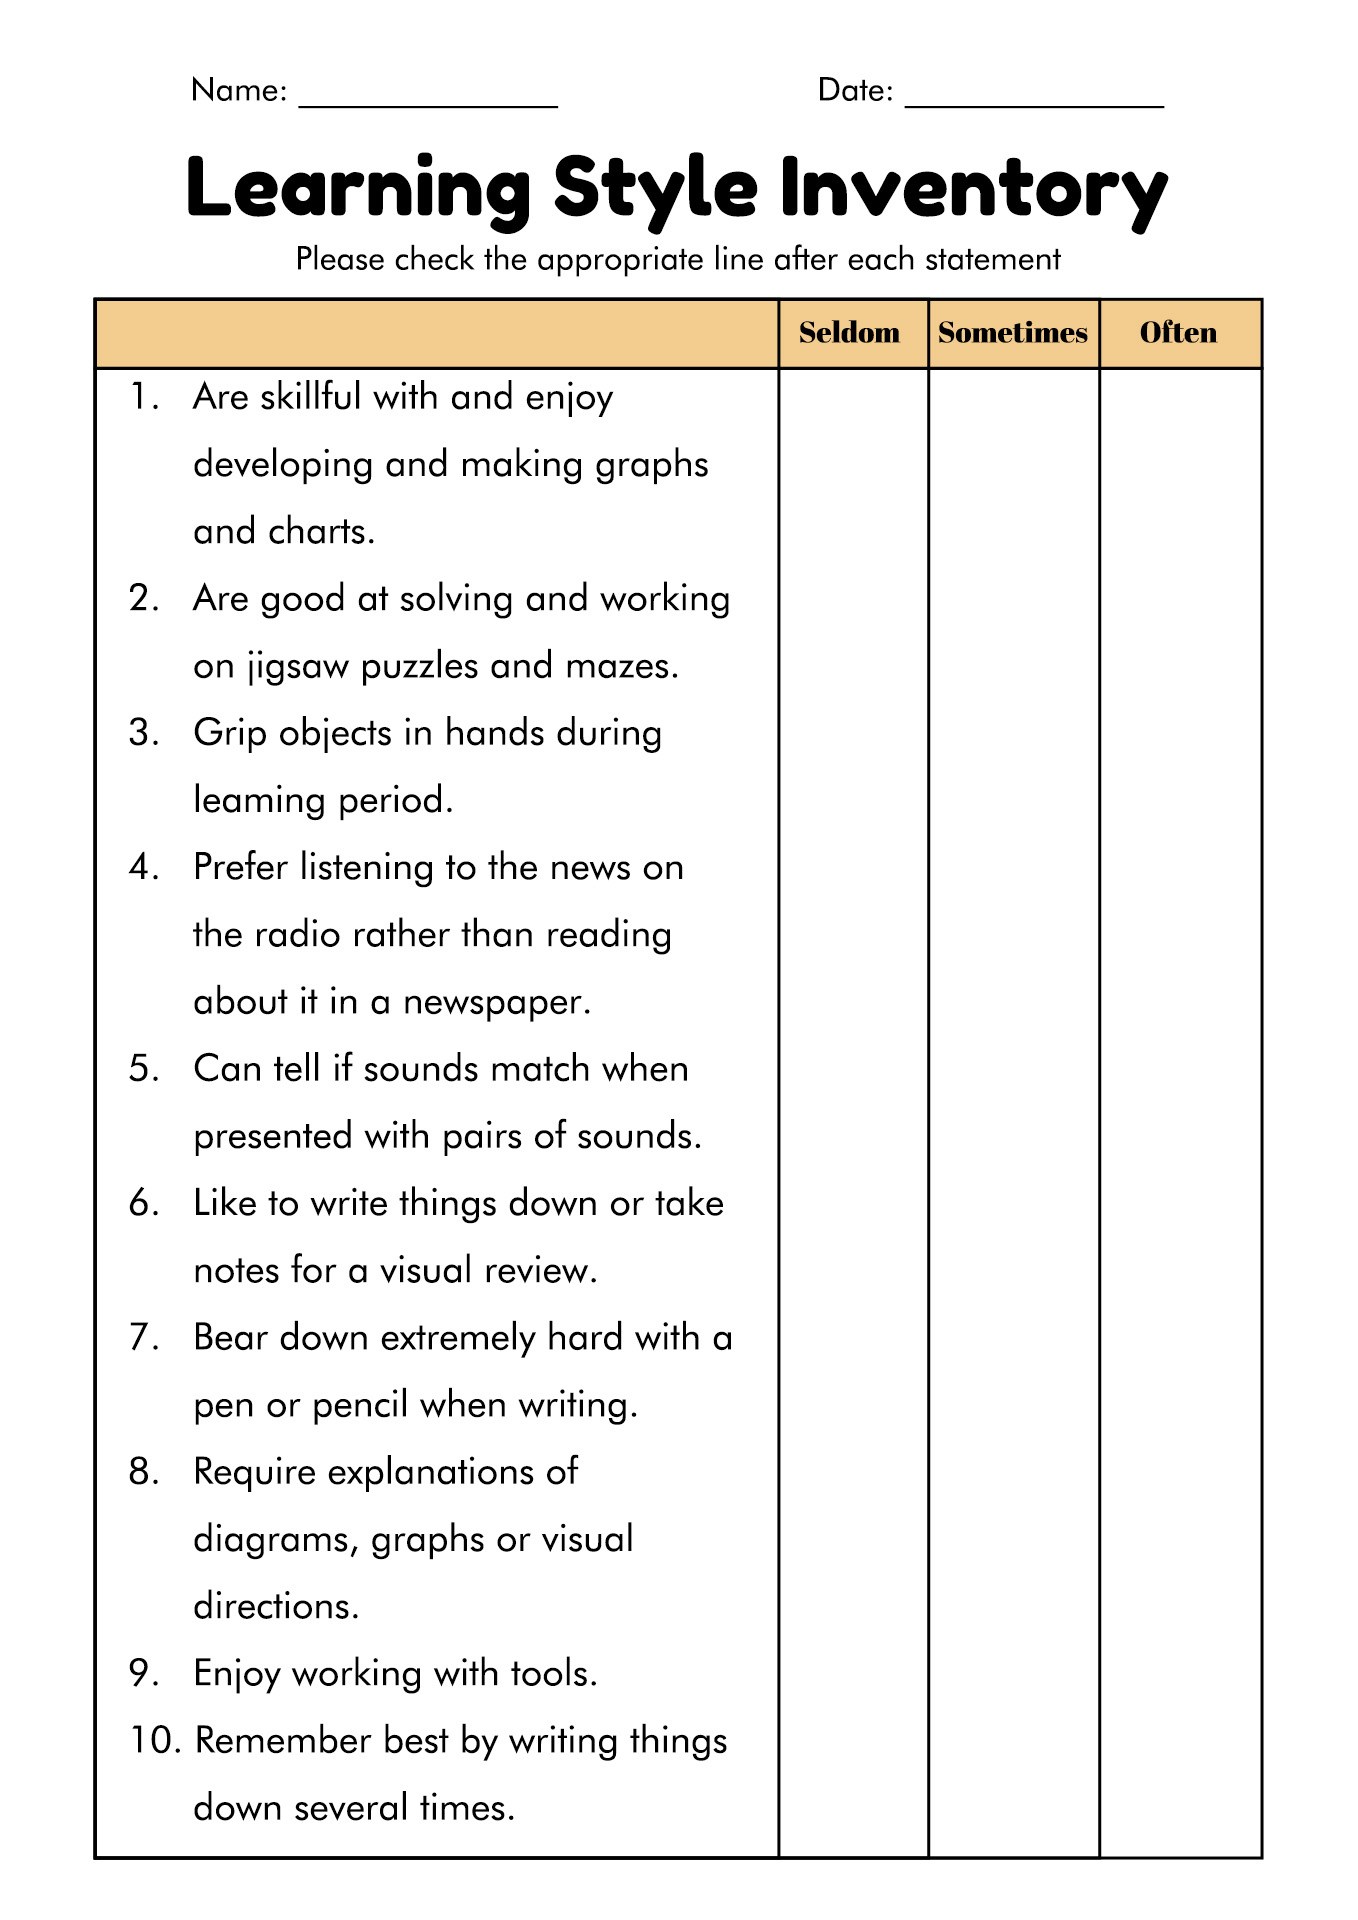 16 Vark Styles Worksheet Free PDF At Worksheeto - Free Learning Style Inventory For Students Printable